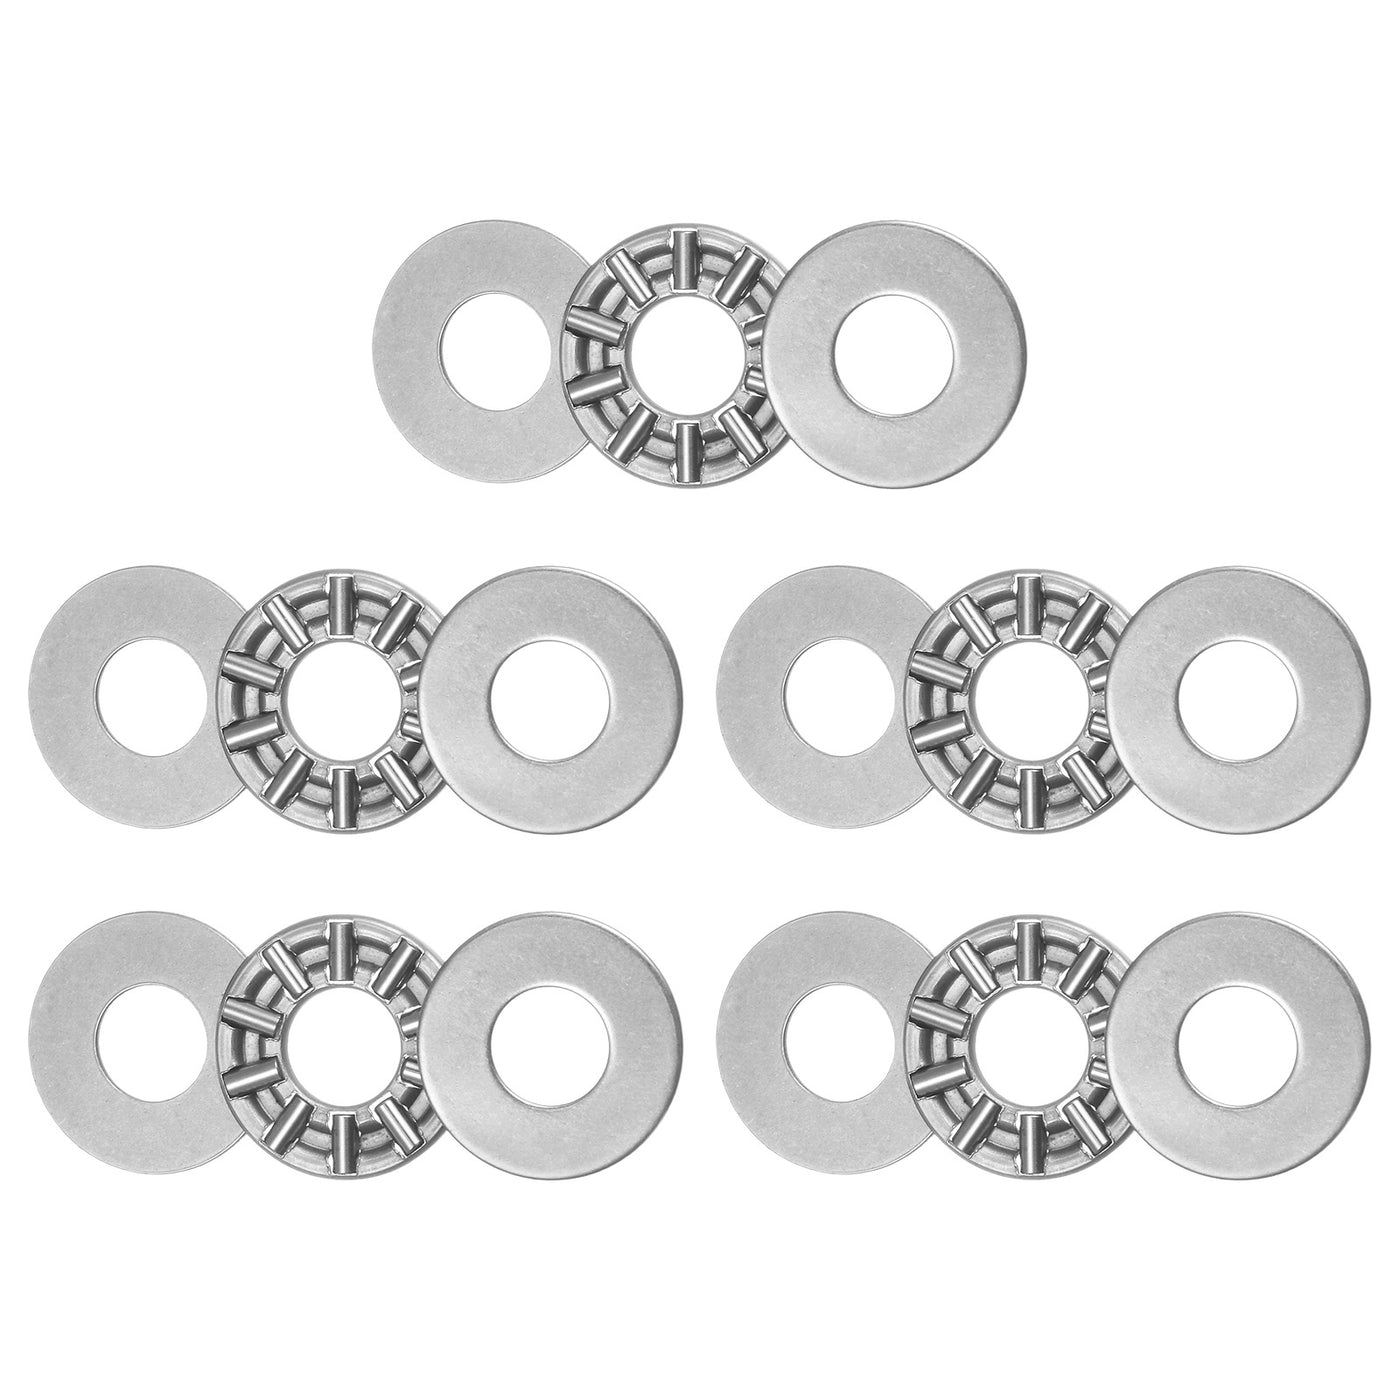 uxcell Uxcell AXK0819 Thrust Needle Roller Bearings 8x19x2mm with AS0819 Washers 5pcs